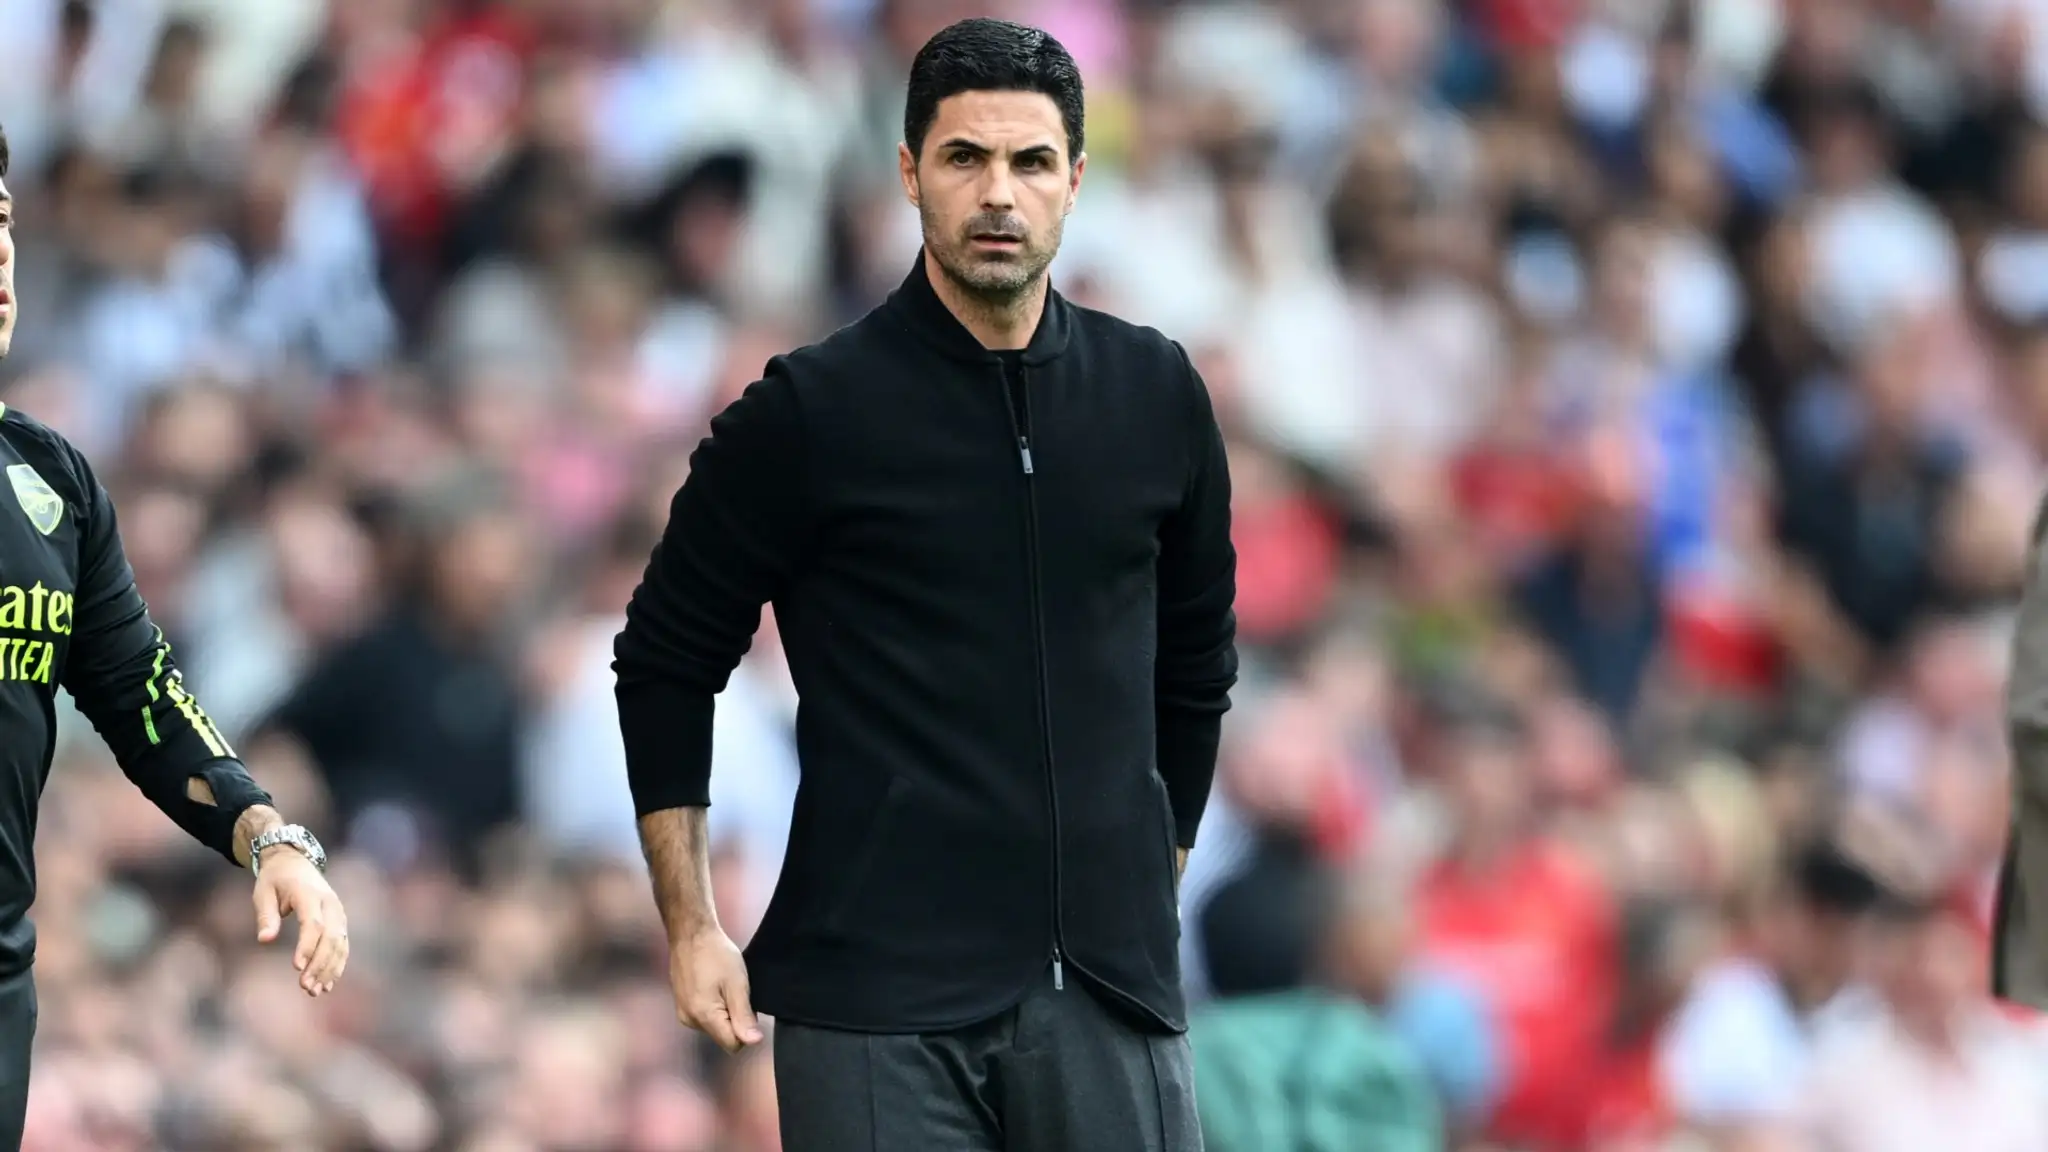 'That's history!' - Arsenal boss Mikel Arteta hails Gunners as they set new club record for Premier League wins with vital Manchester United victory that takes title race to final day